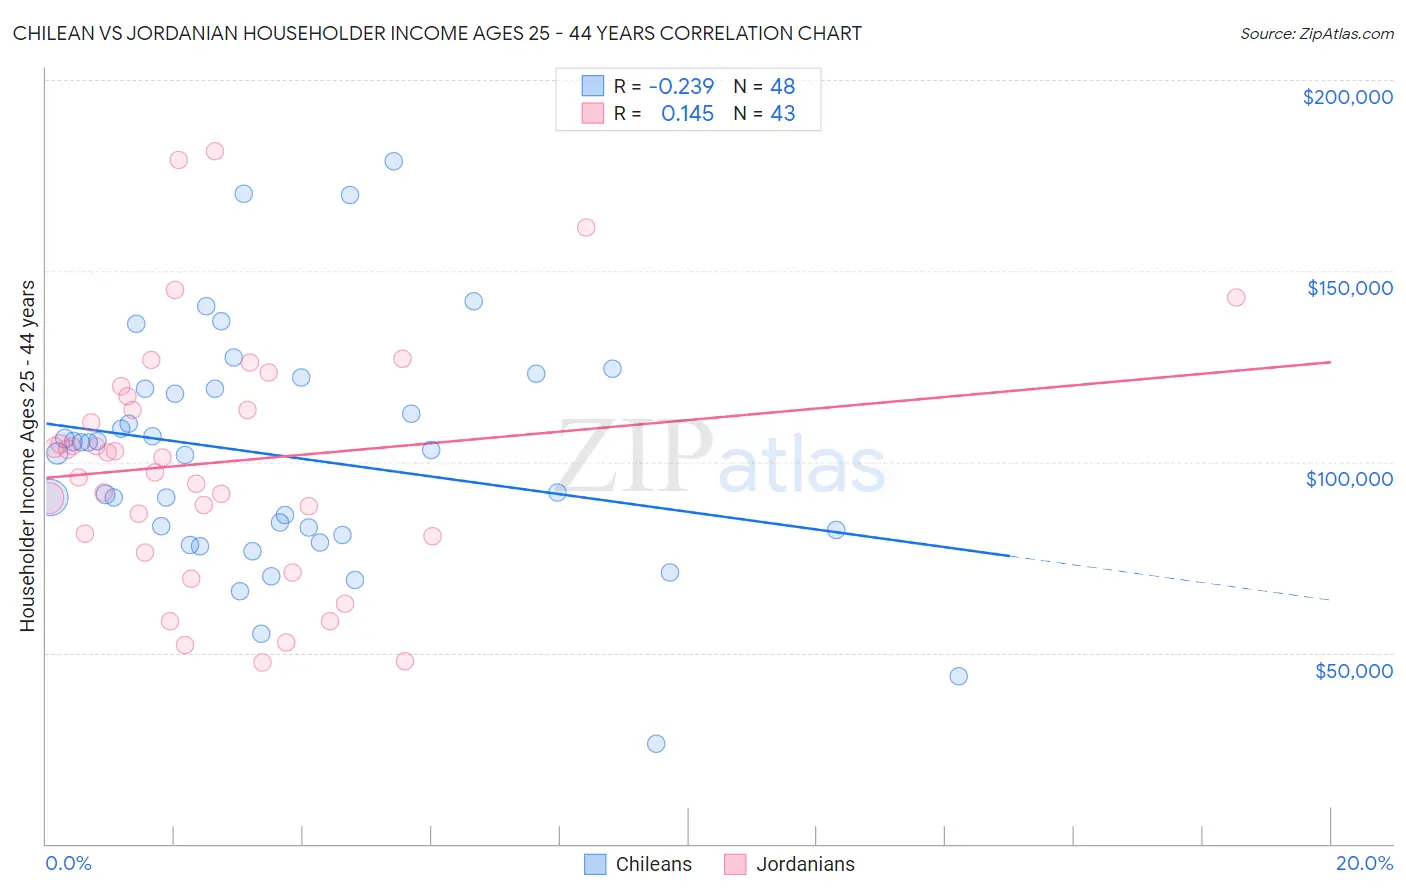 Chilean vs Jordanian Householder Income Ages 25 - 44 years